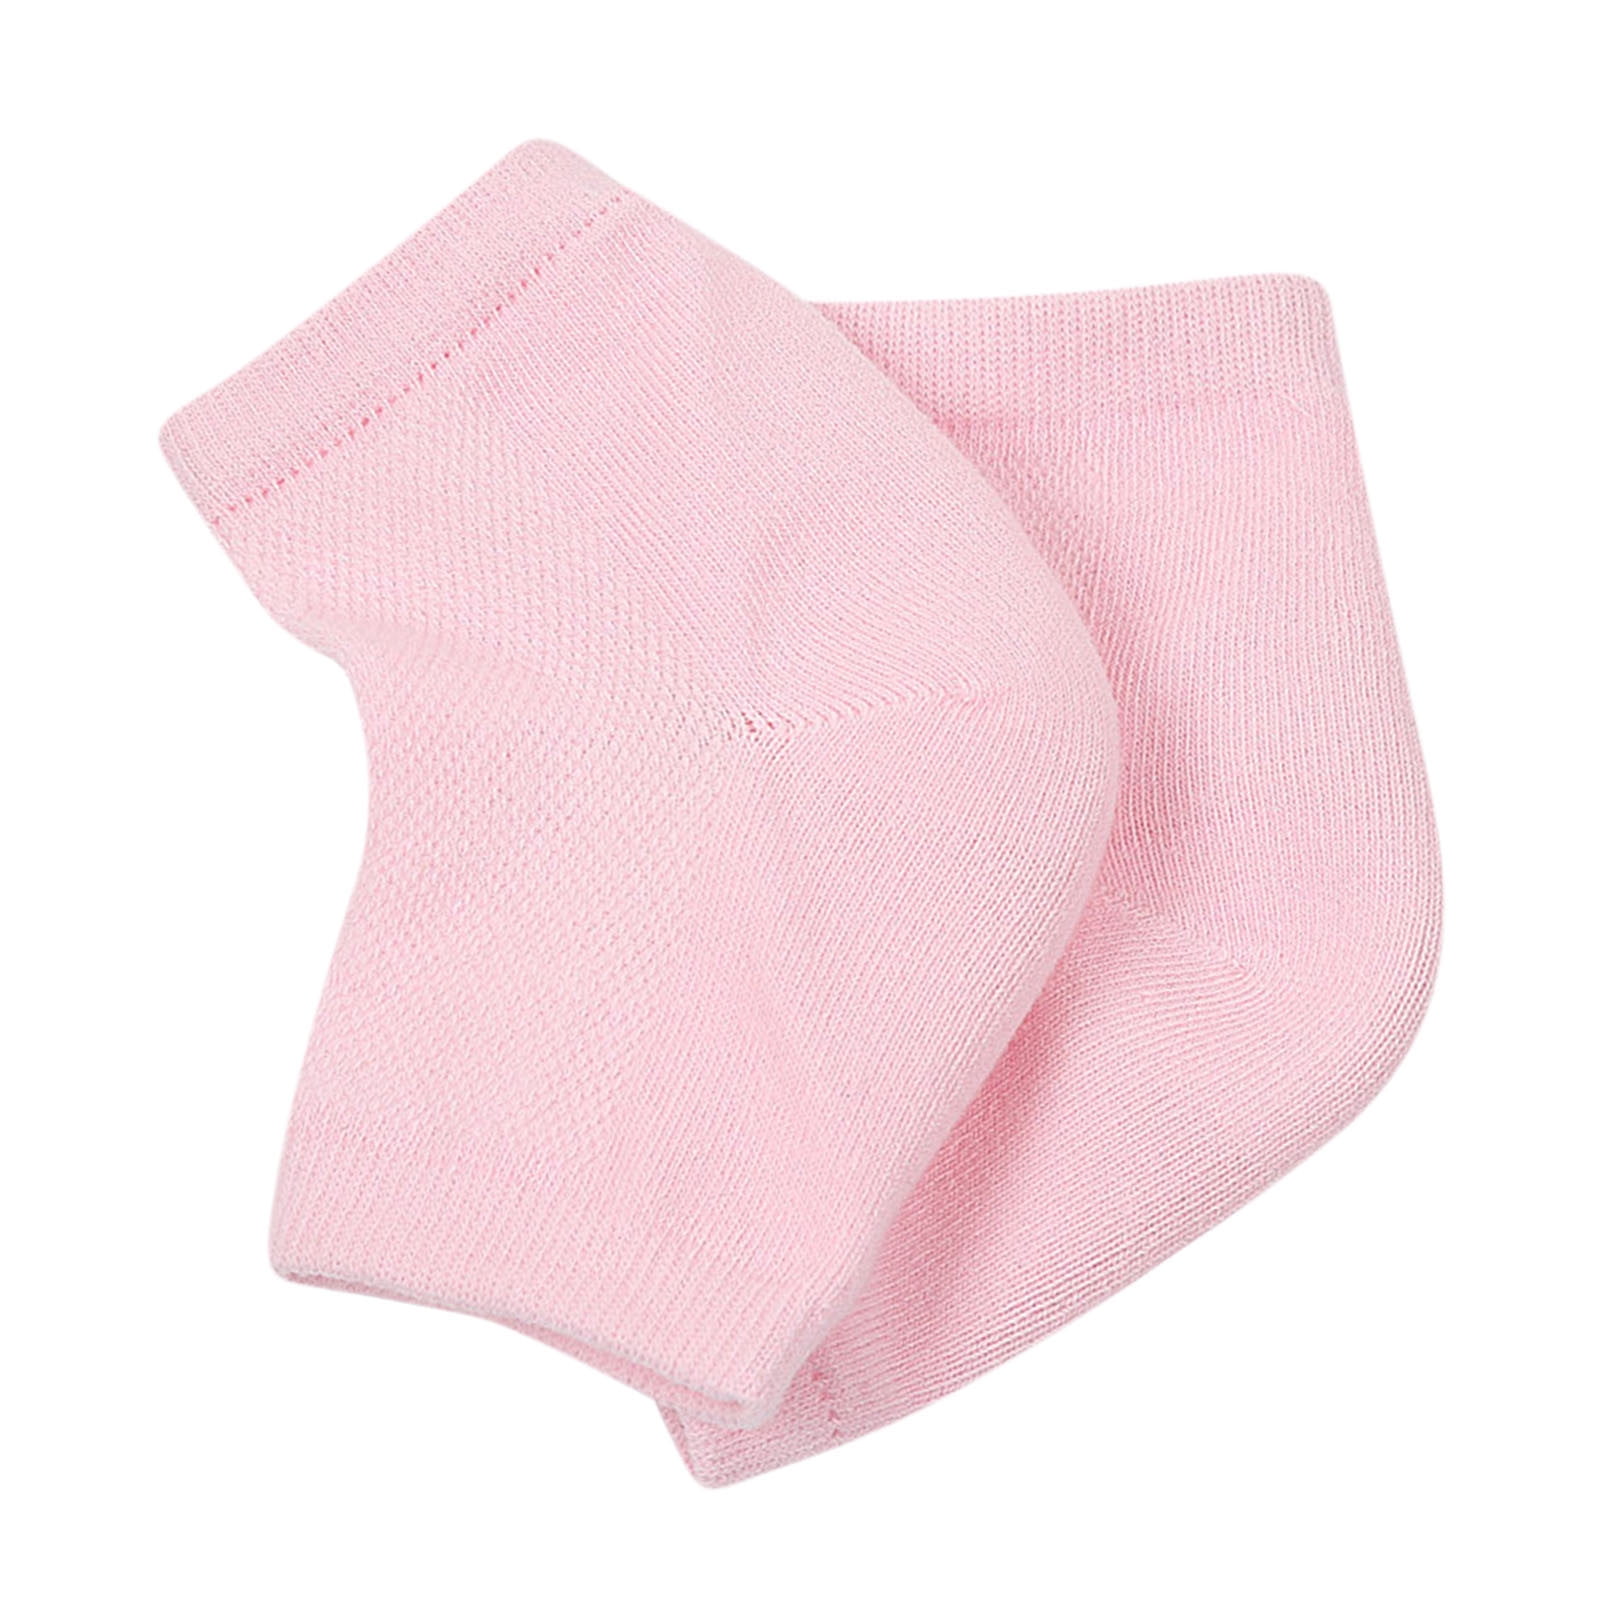 Height Max Socks, Height Max Insoles, Soles For Height Insoles, Bionics  Thickened Sock Sleeve Shoe Insert 